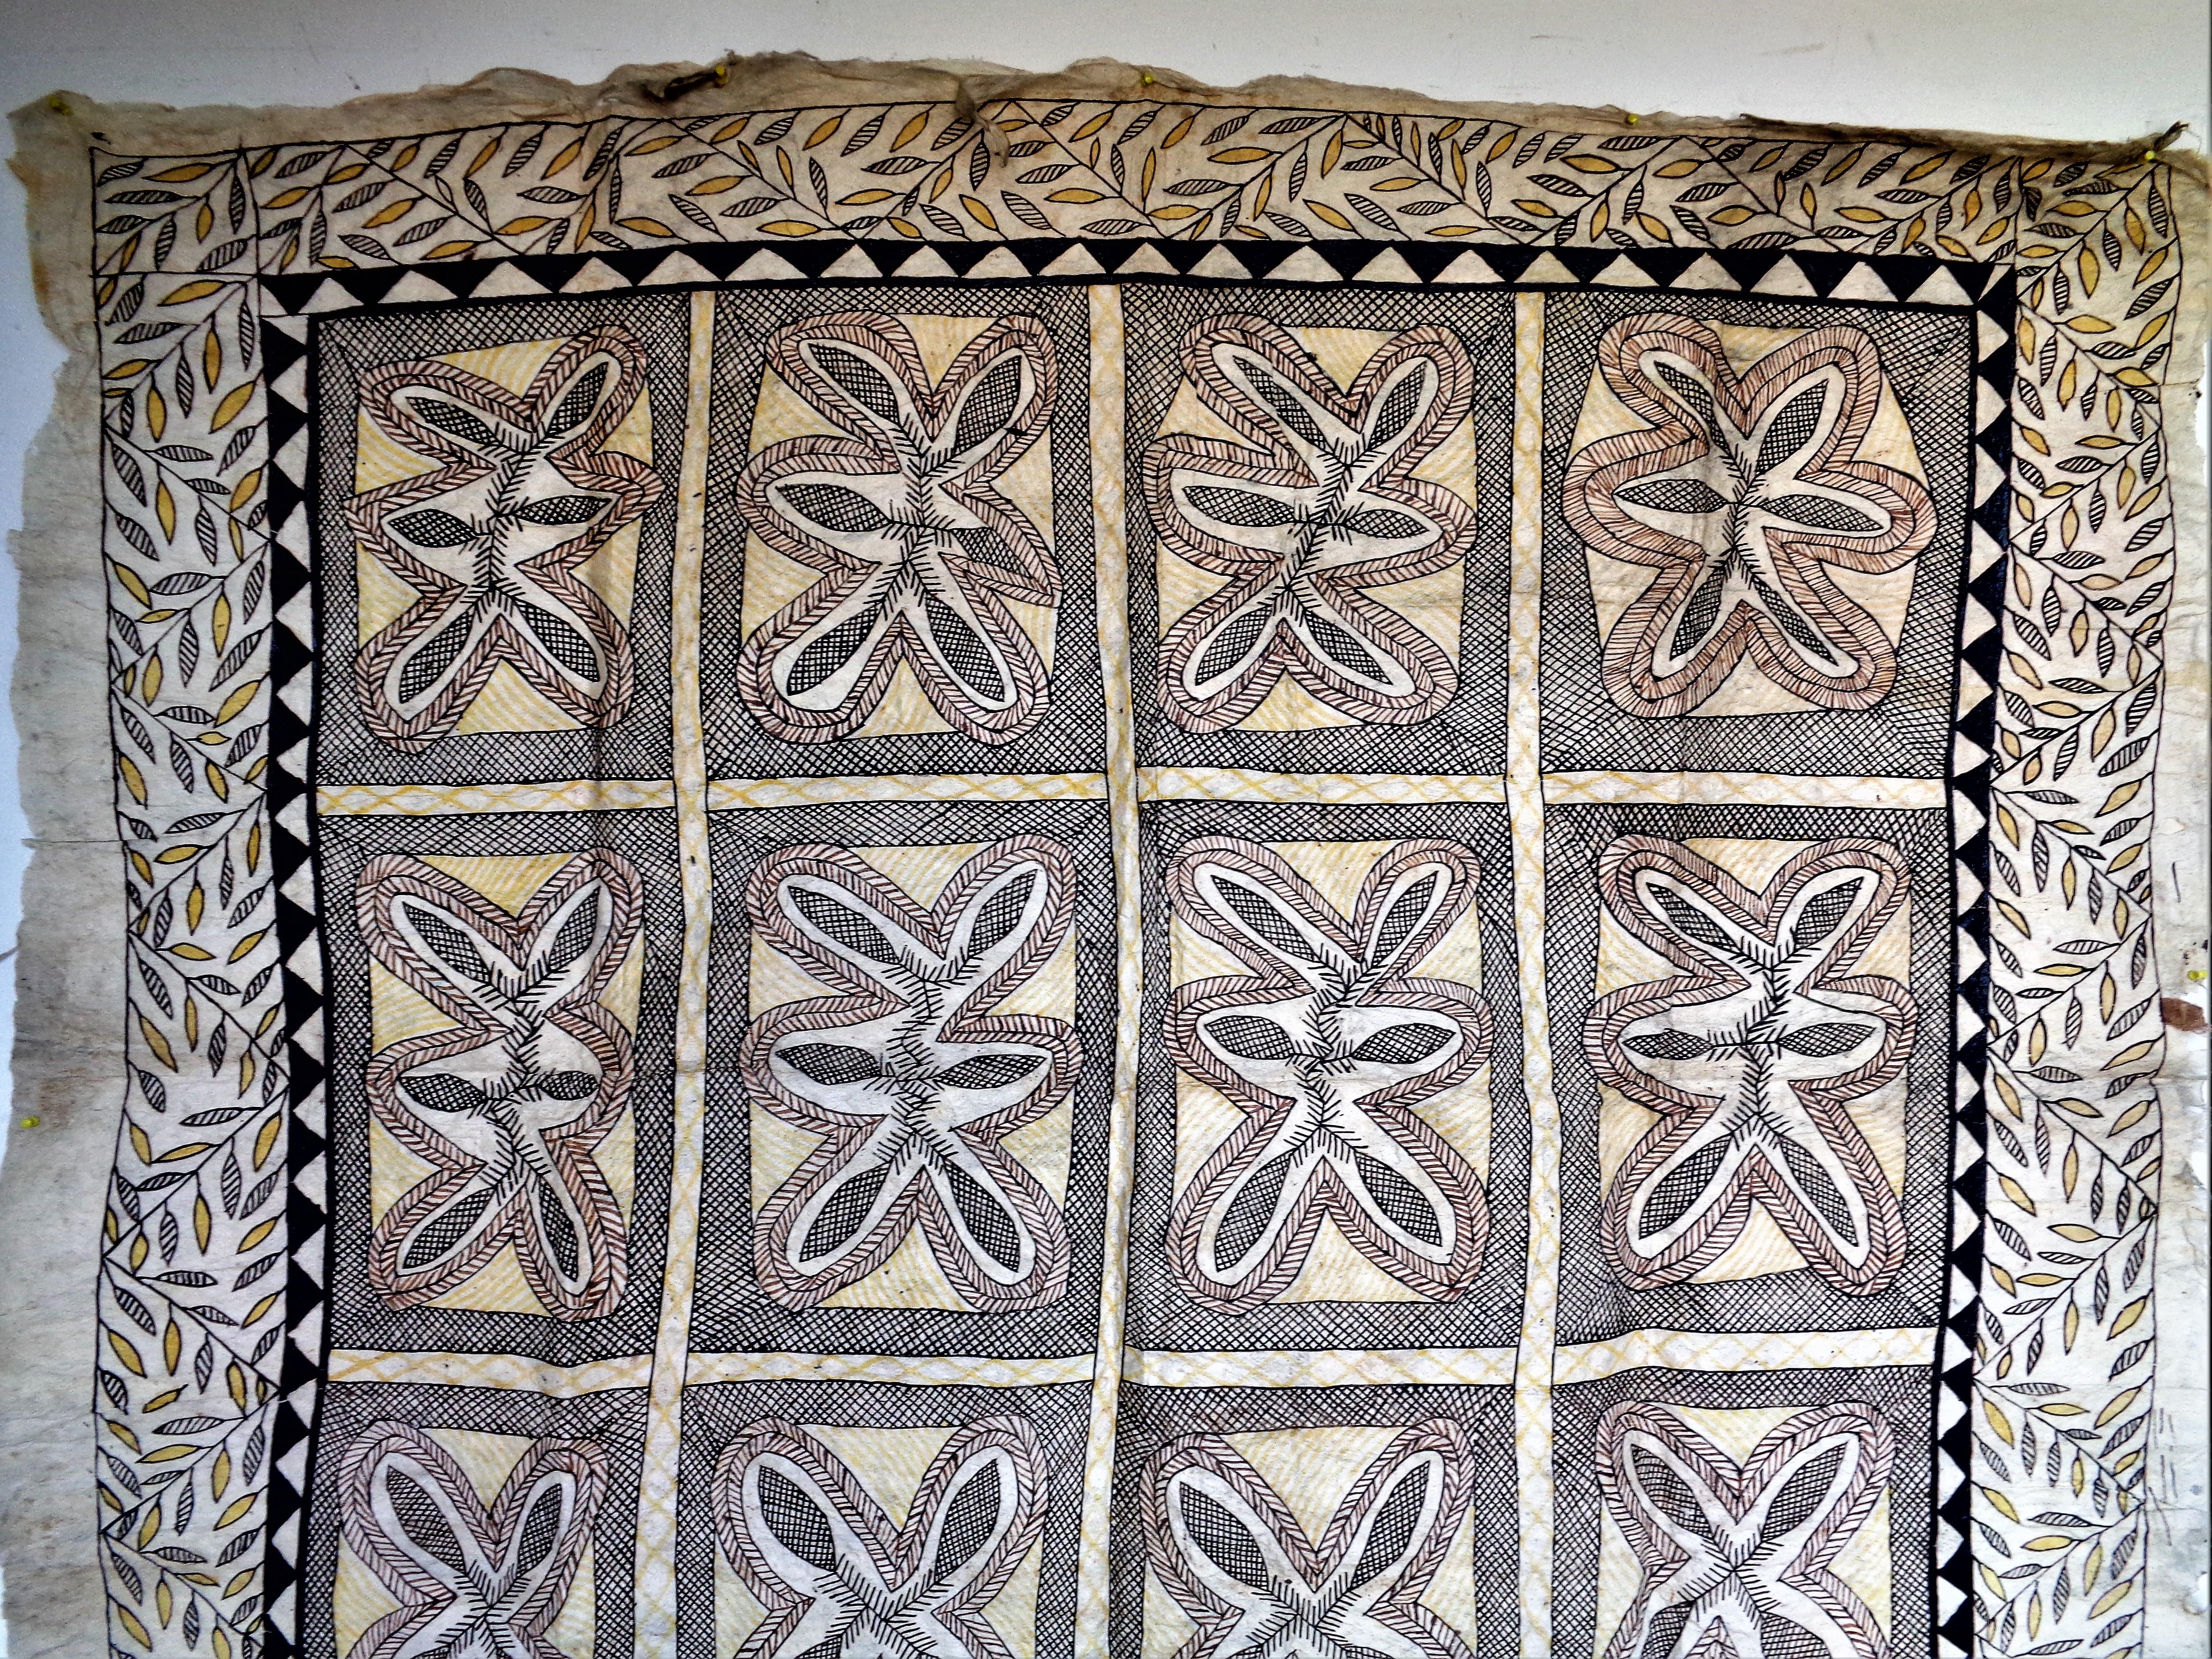 Antique Samoa Siapo ( tapa cloth ) made from the inner bark of the mulberry tree. Free hand paint decorated ( Siapo Mamanu ) with the natural dyes from plants, trees and clays. This Tapa cloth has not seen the light of day for many years - descended